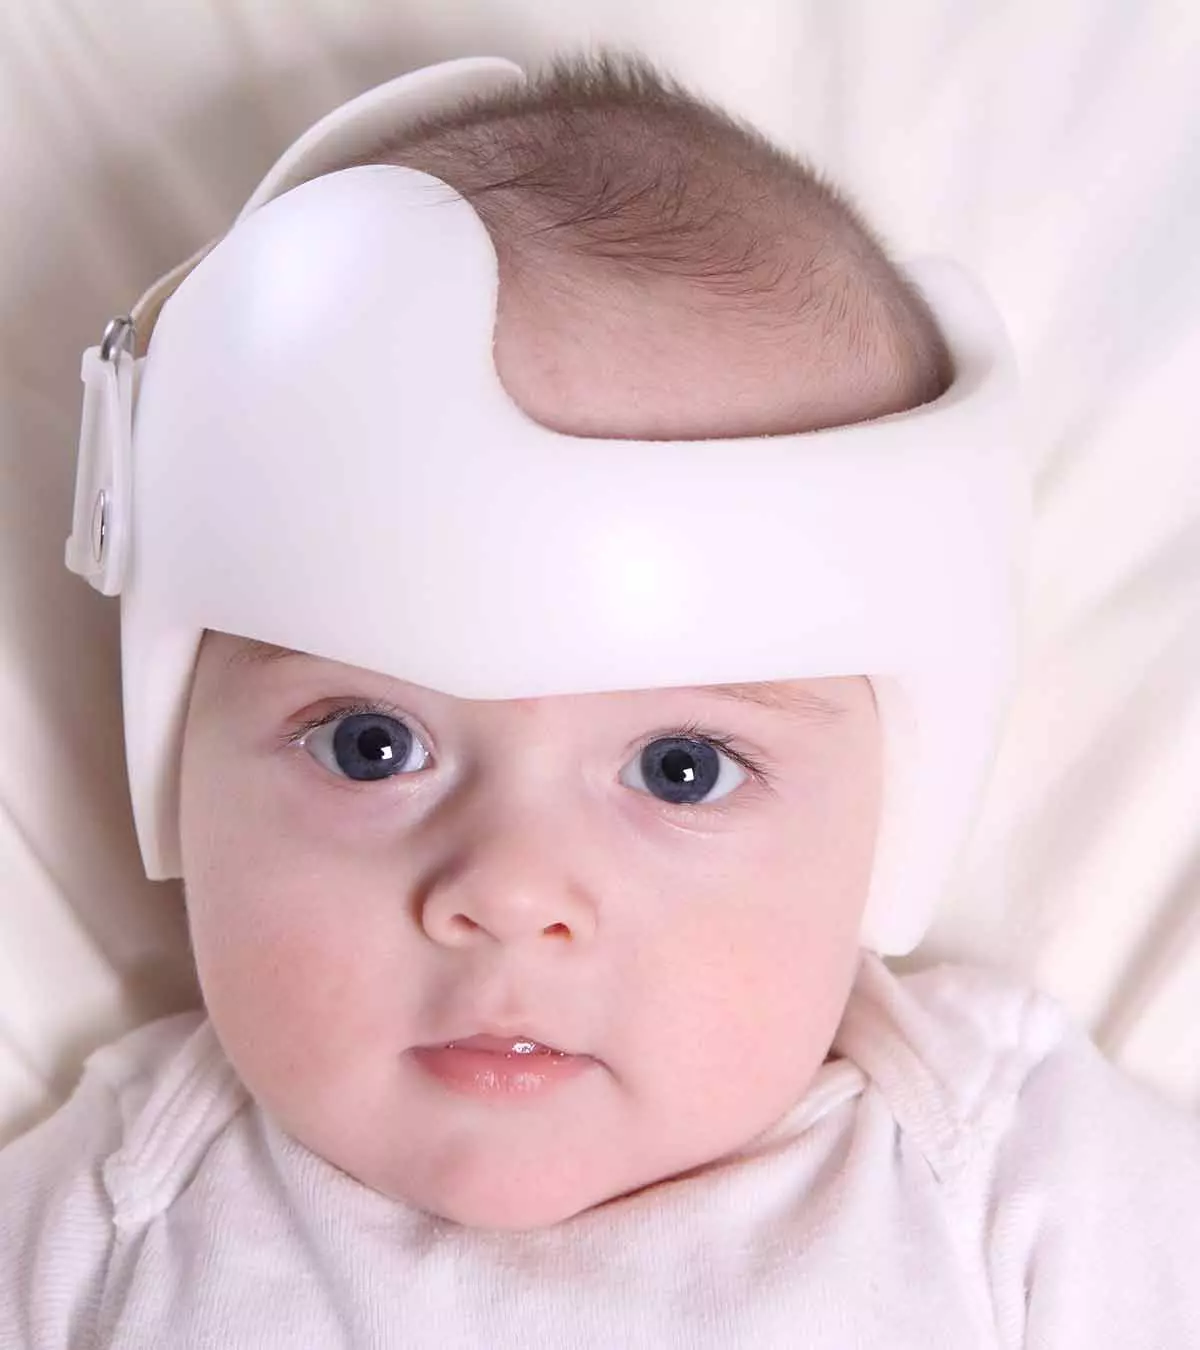 Flat Head Syndrome (Plagiocephaly) Causes, Symptoms And Treatment